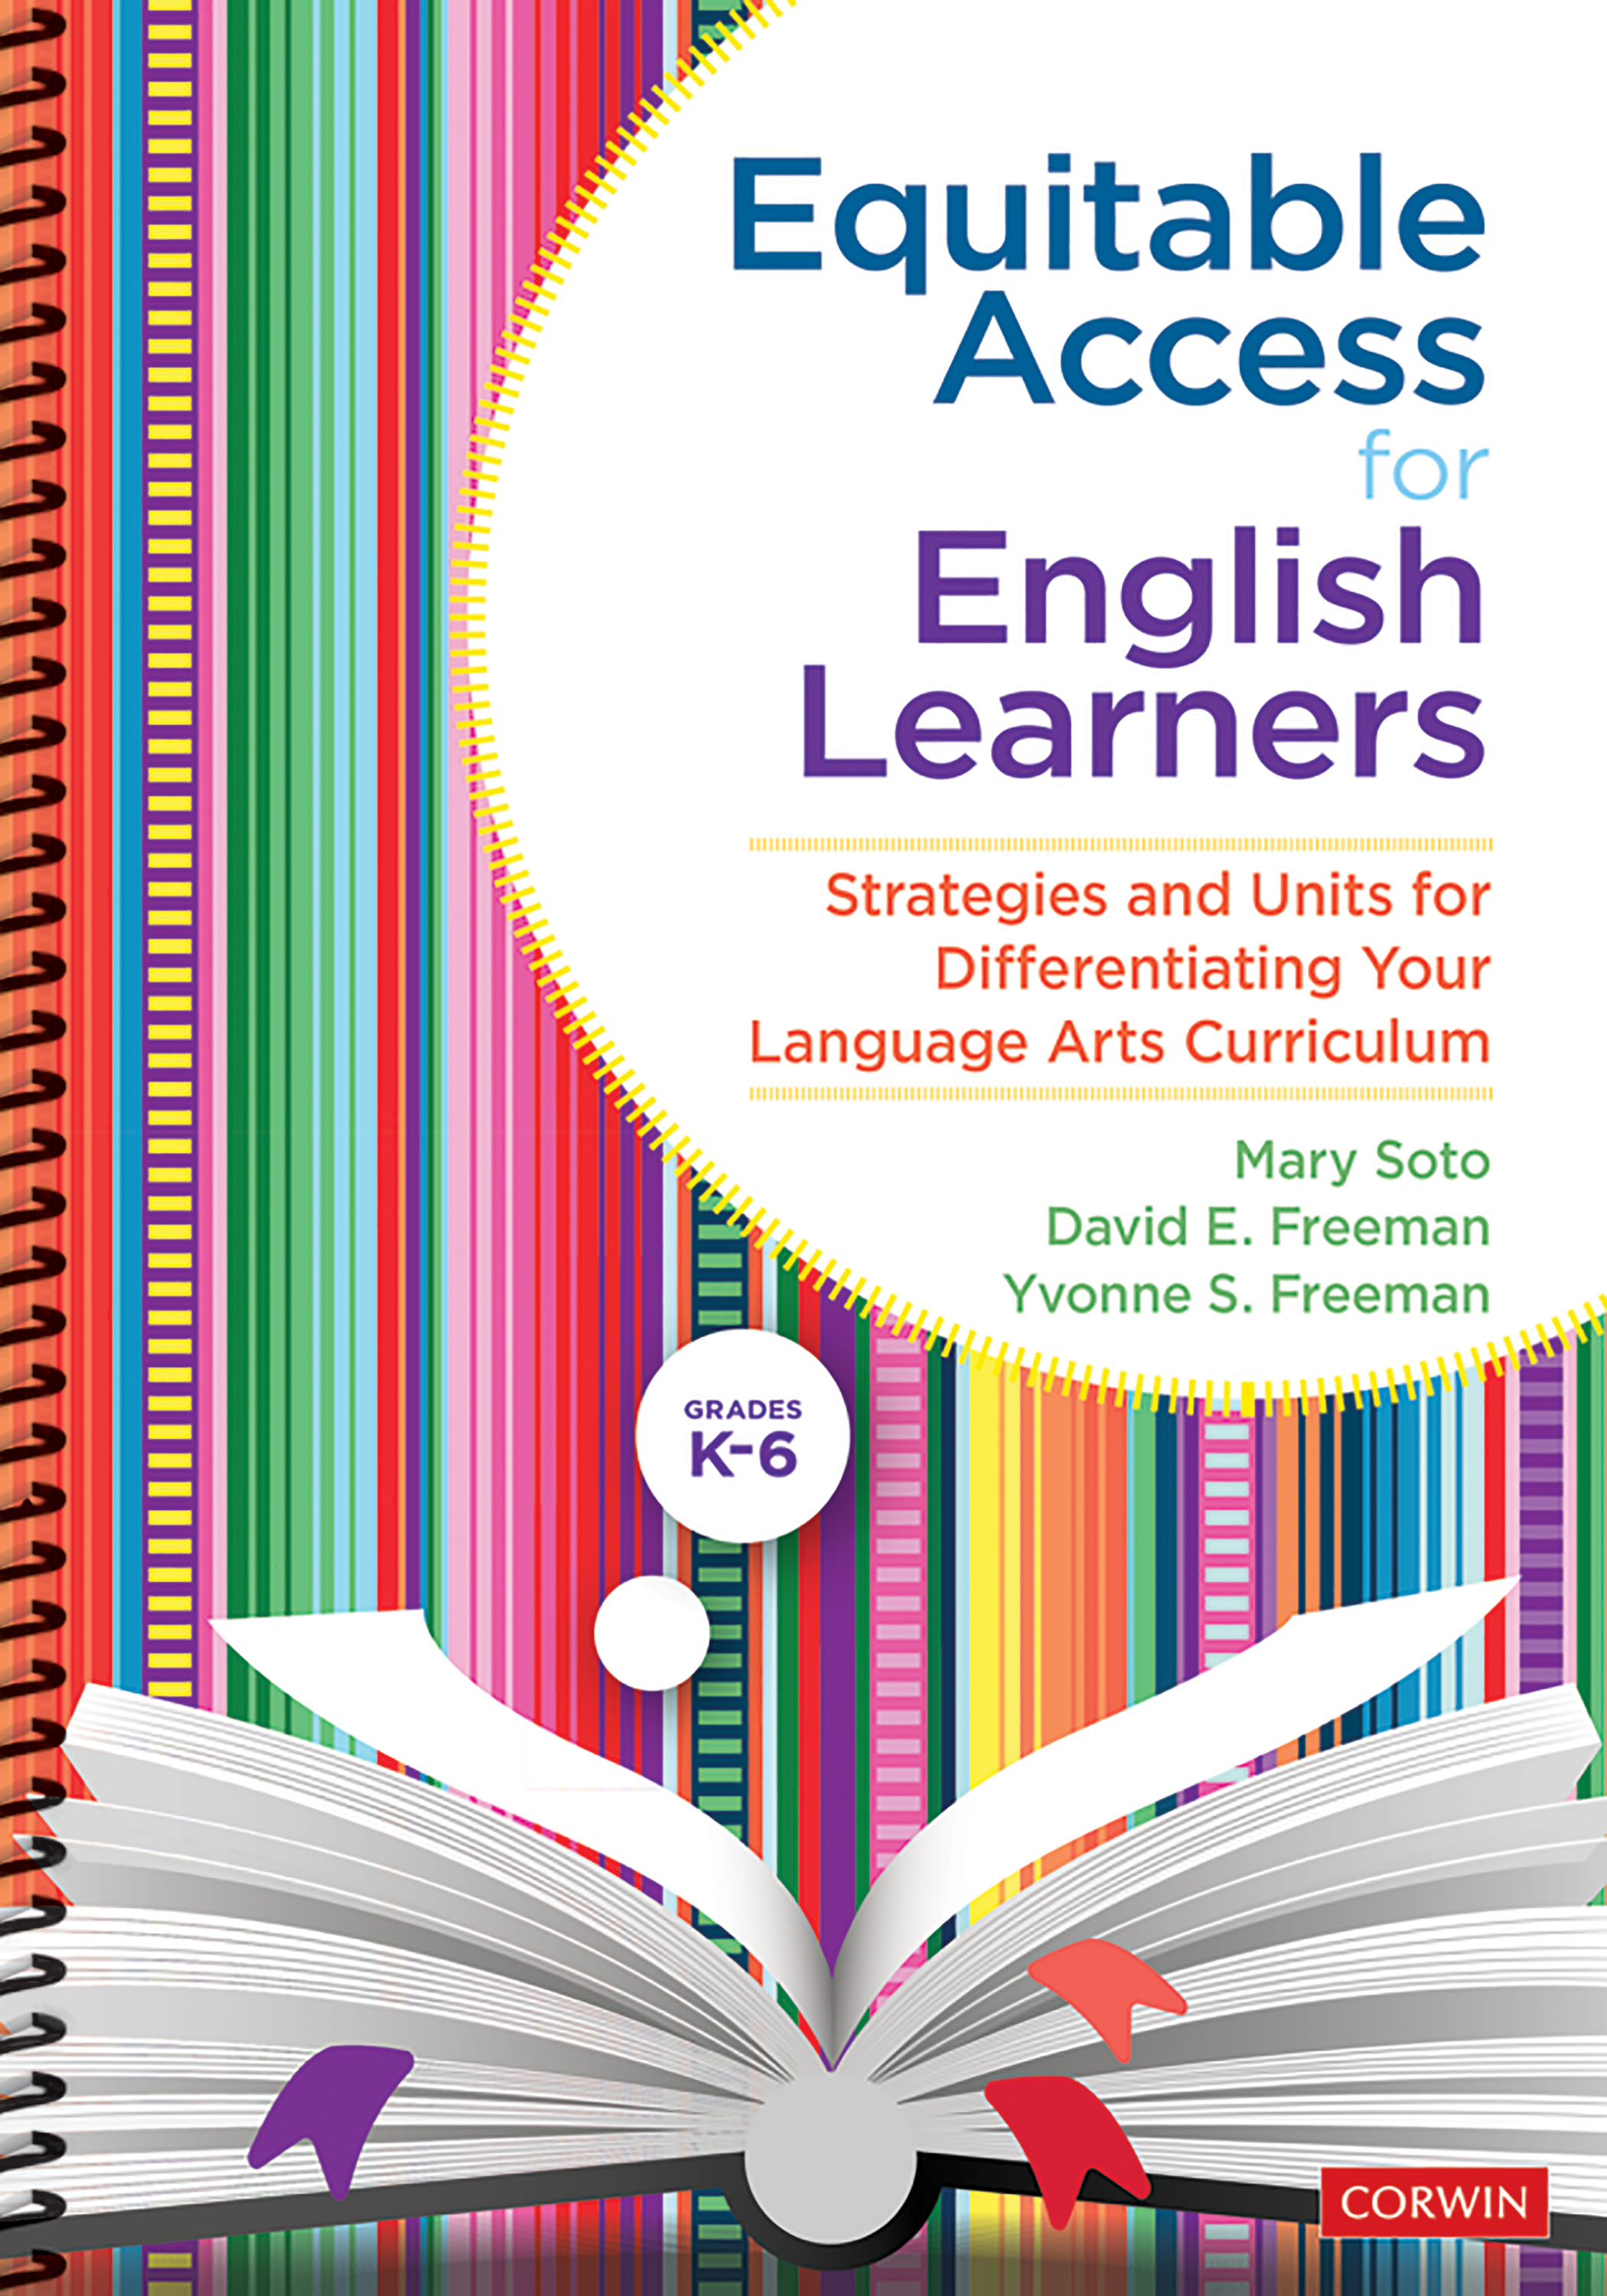 Equitable Access for English Learners, Grades K-6